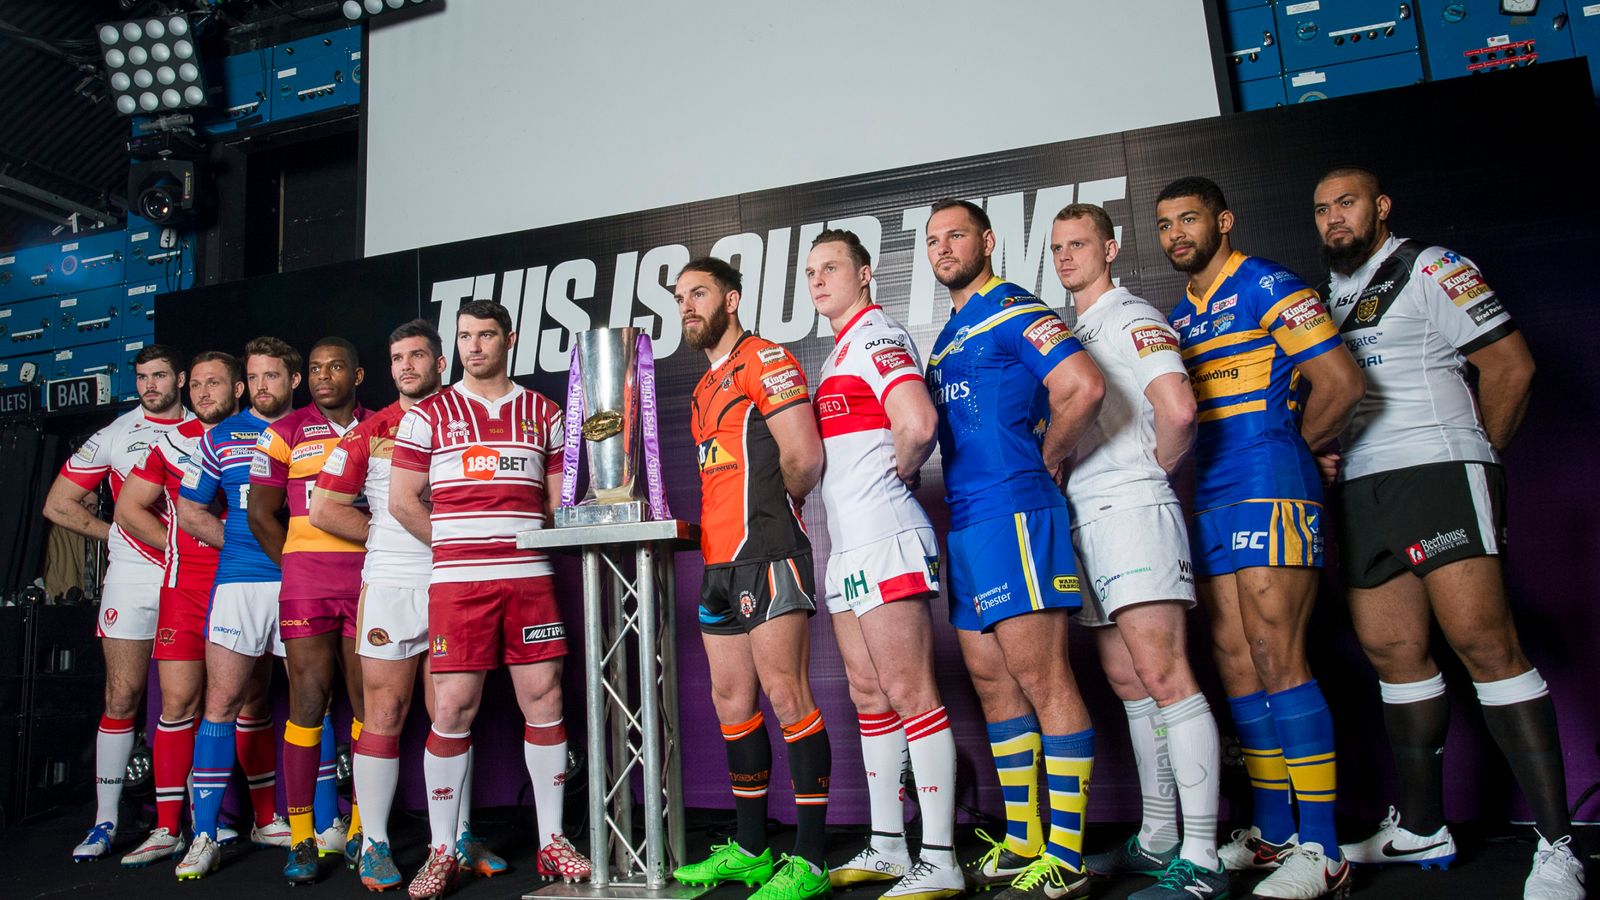 Attendances increase for Super League's opening weekend